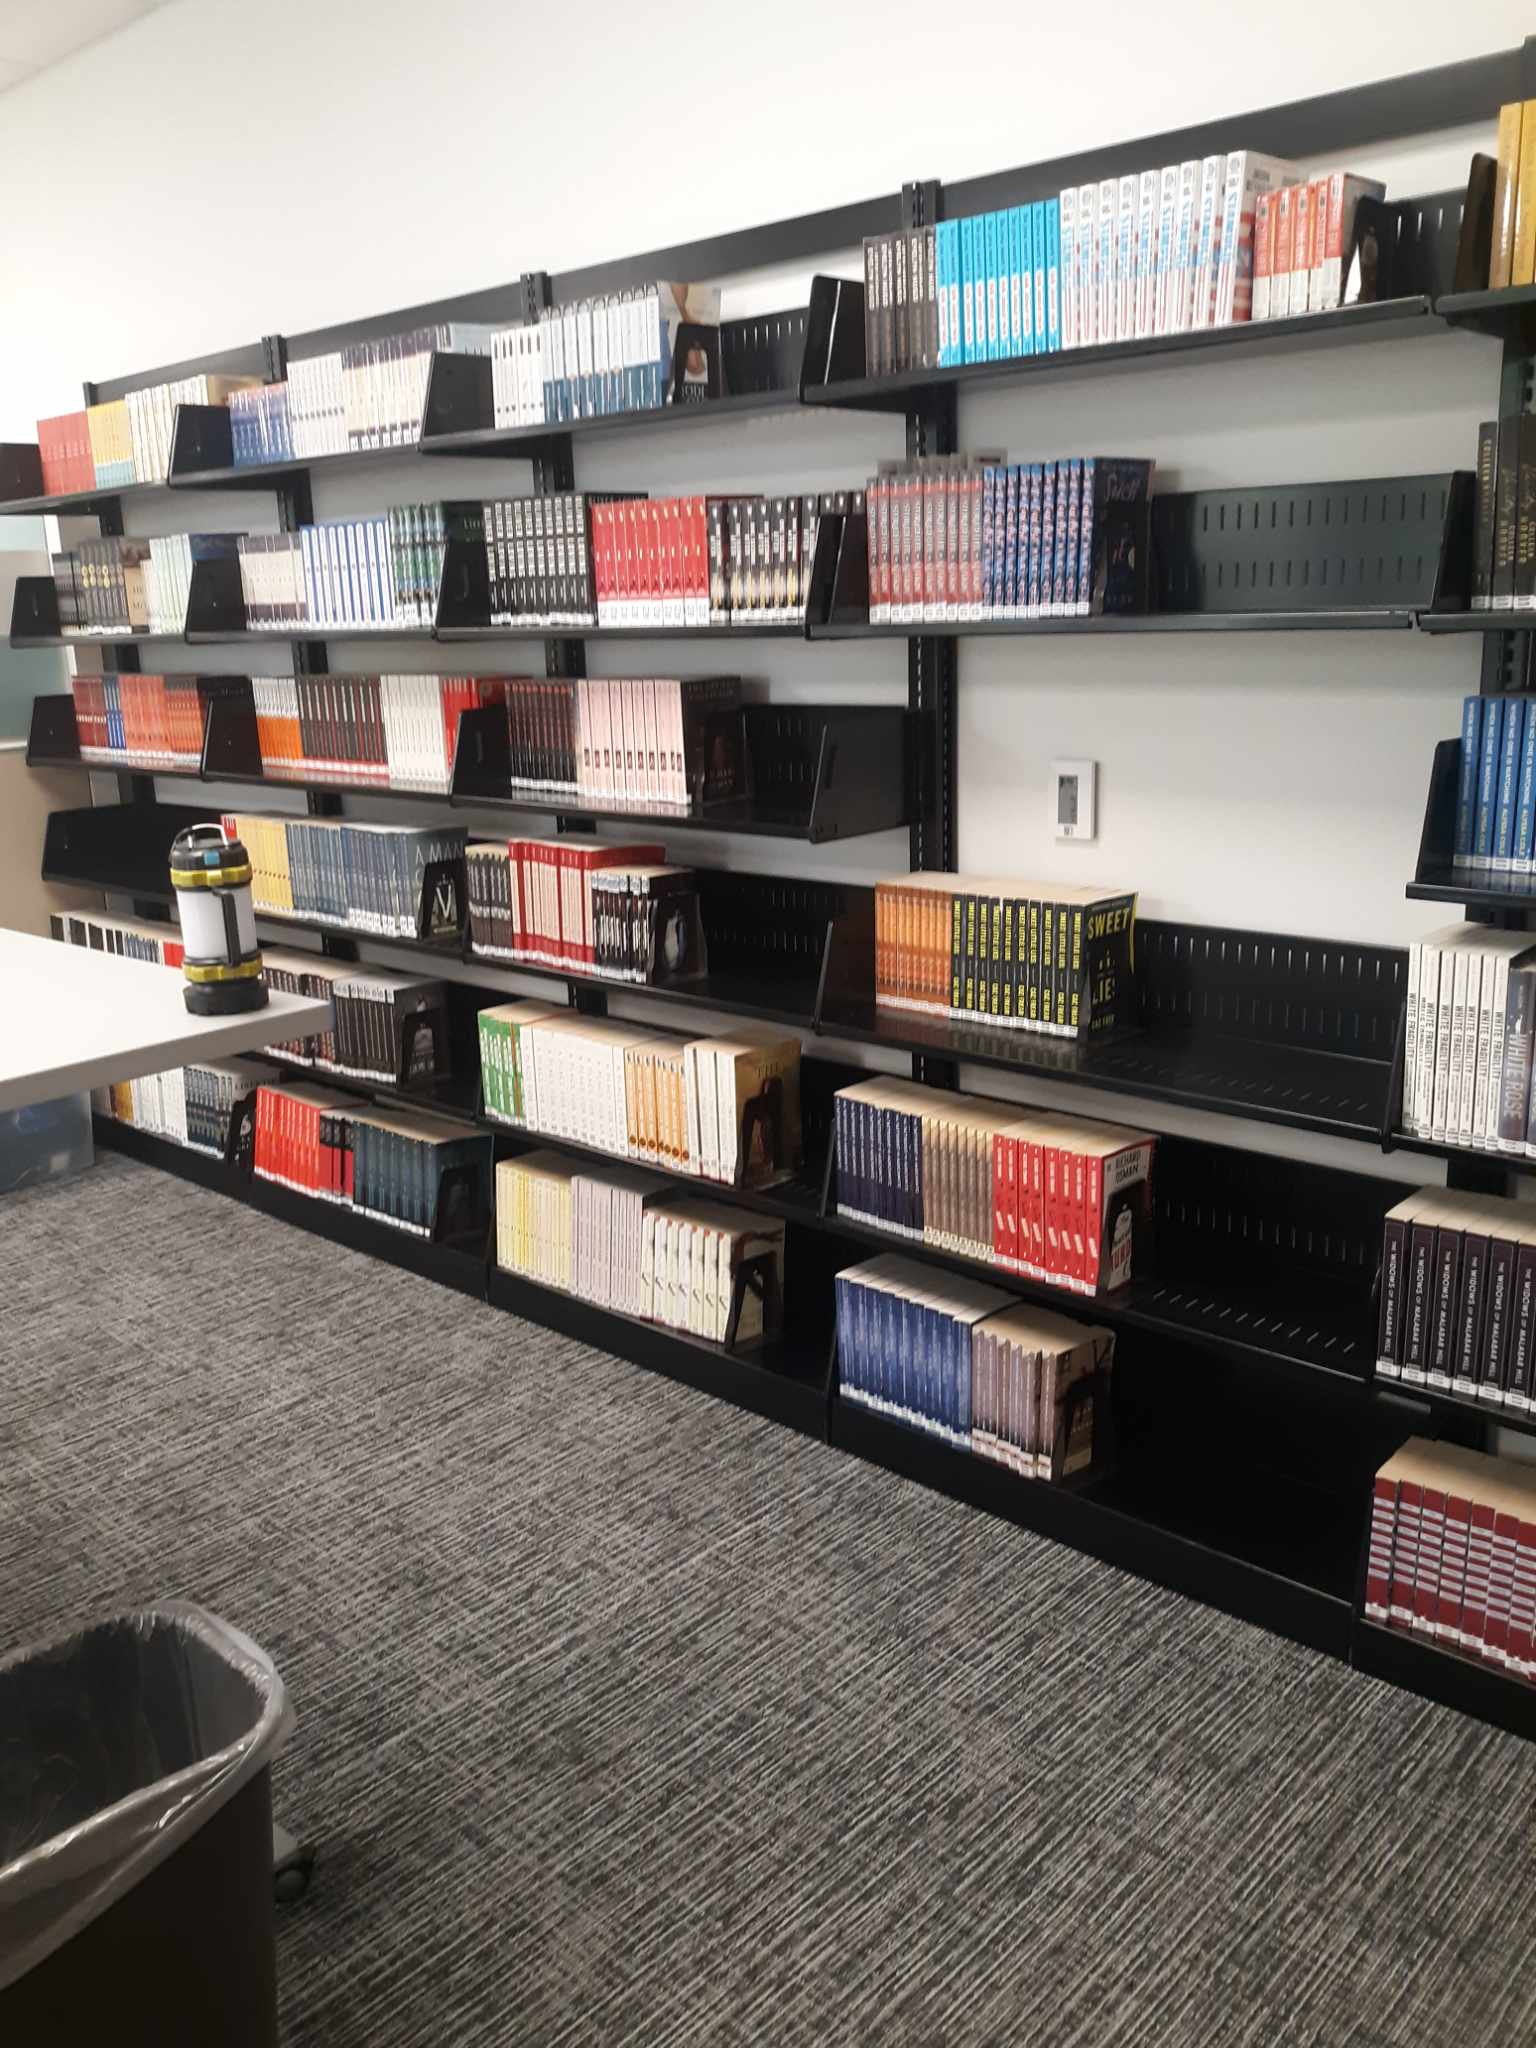 Book Club Kits moved to their new shelving in the Adult Services staff workroom.